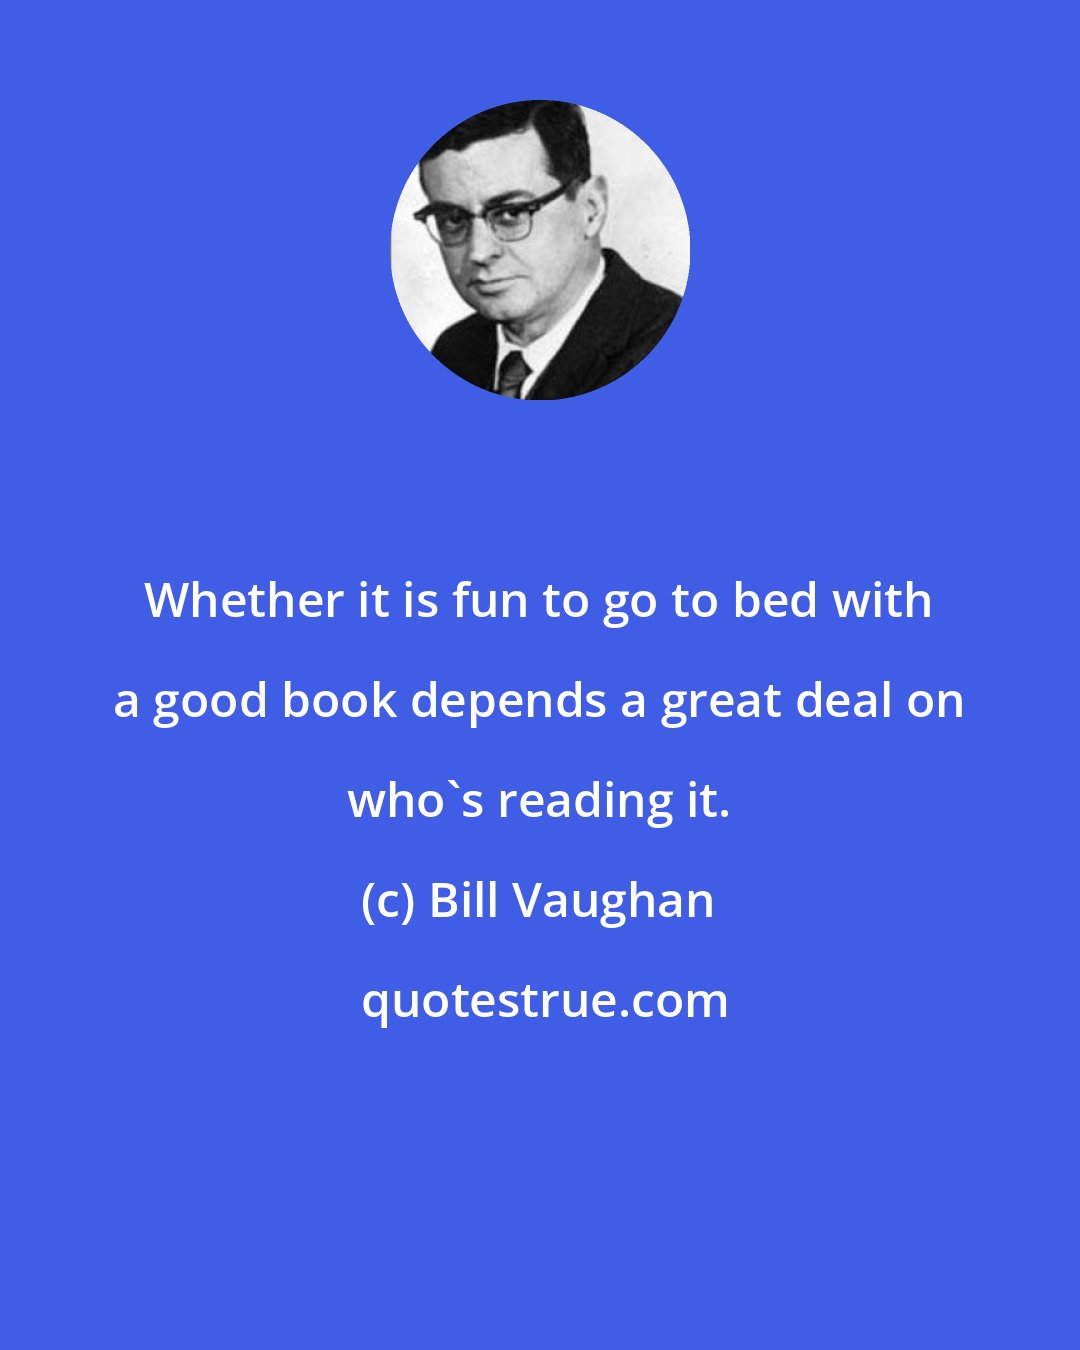 Bill Vaughan: Whether it is fun to go to bed with a good book depends a great deal on who's reading it.